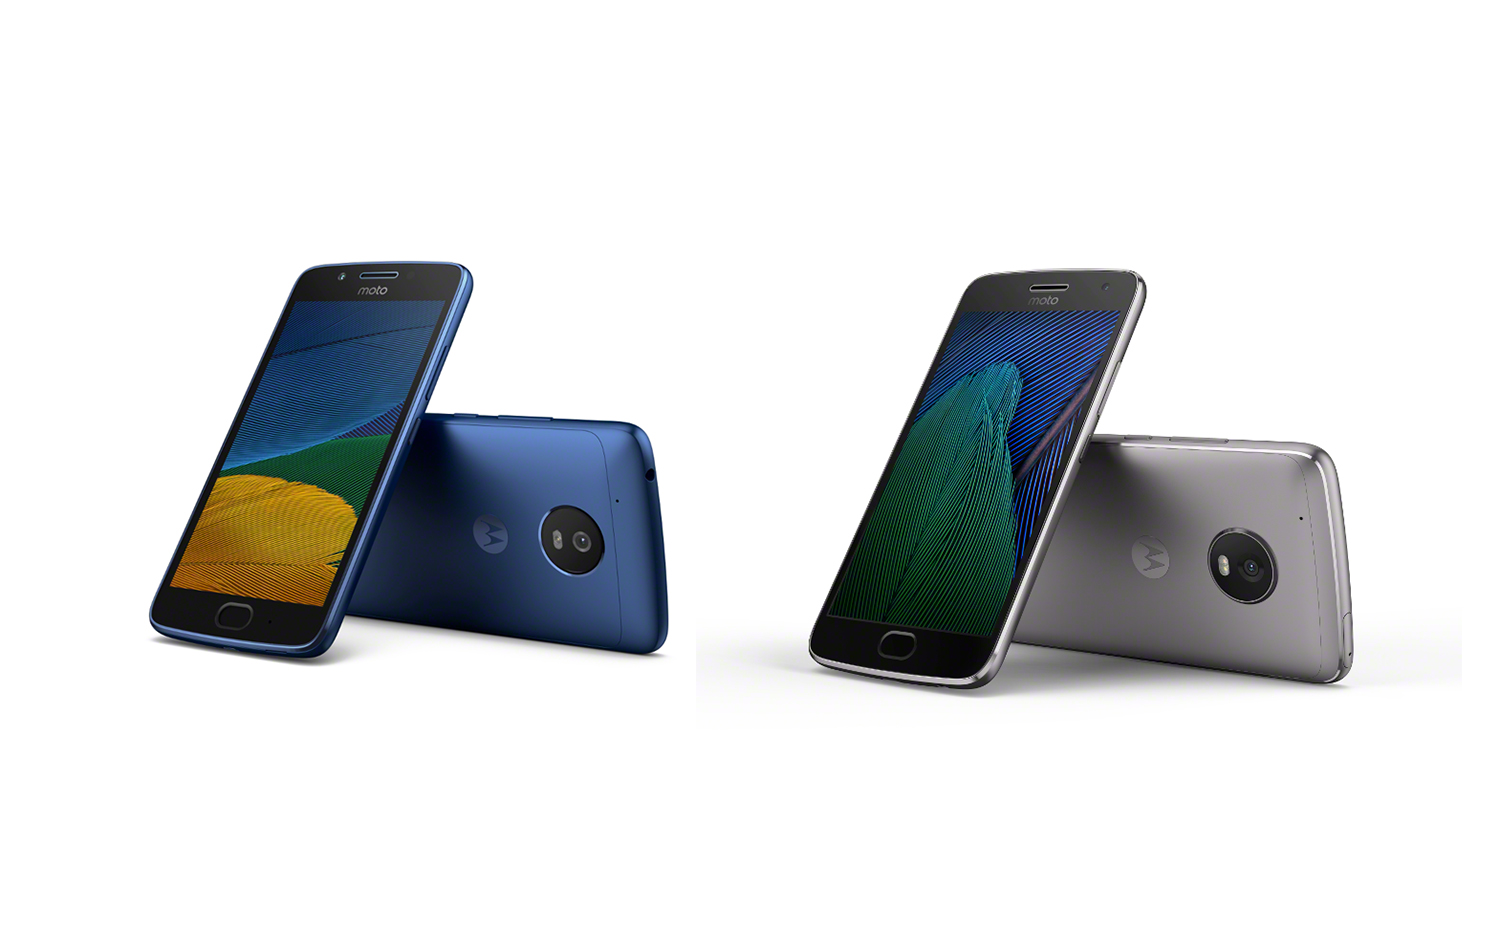 MWC 2017: Moto G5 and G5 Plus Officially Unveiled